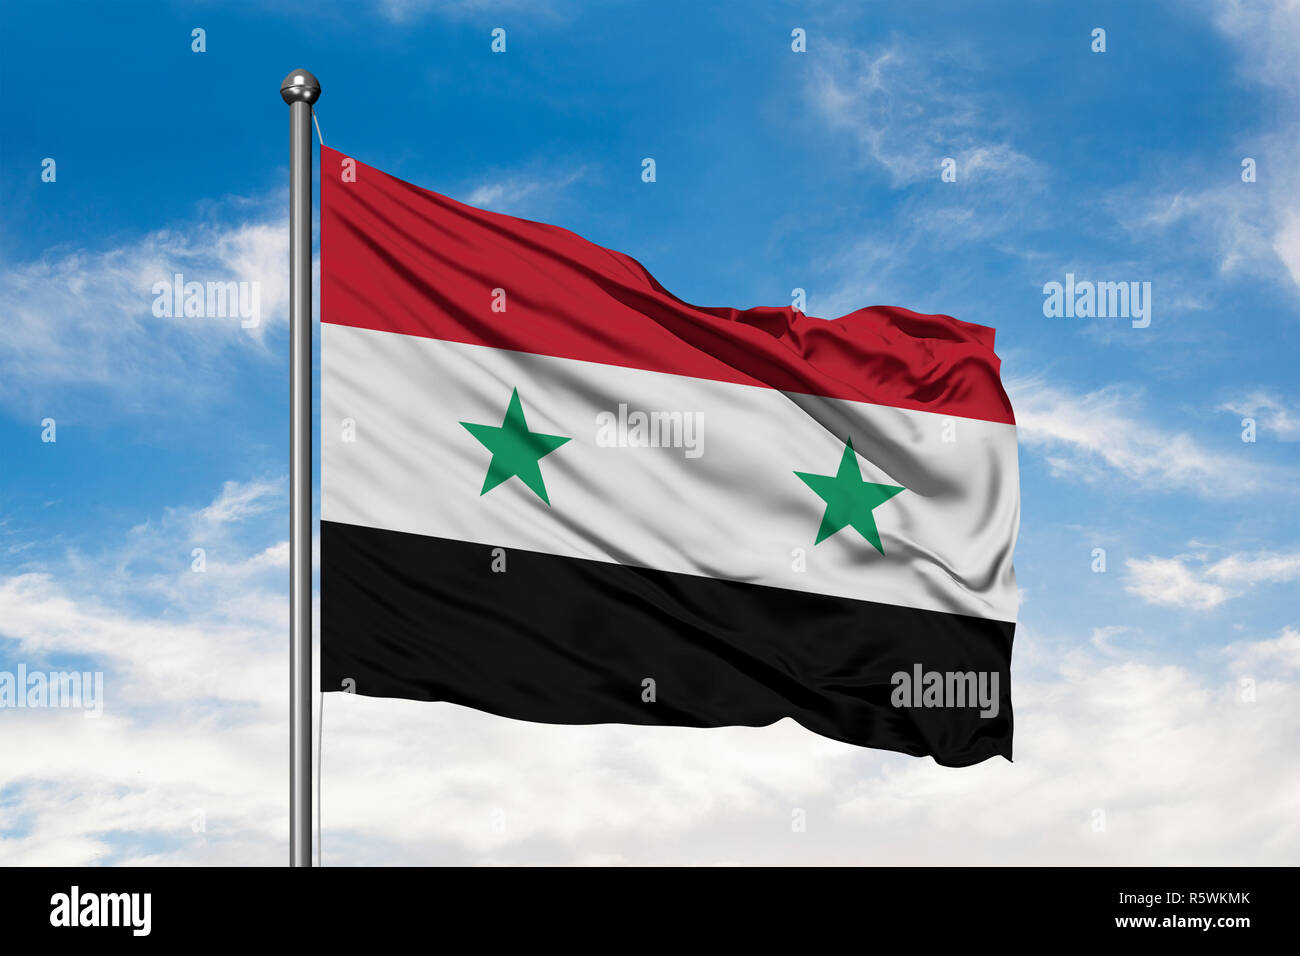 Flag of Syria waving in the wind against white cloudy blue sky. Syrian flag. Stock Photo